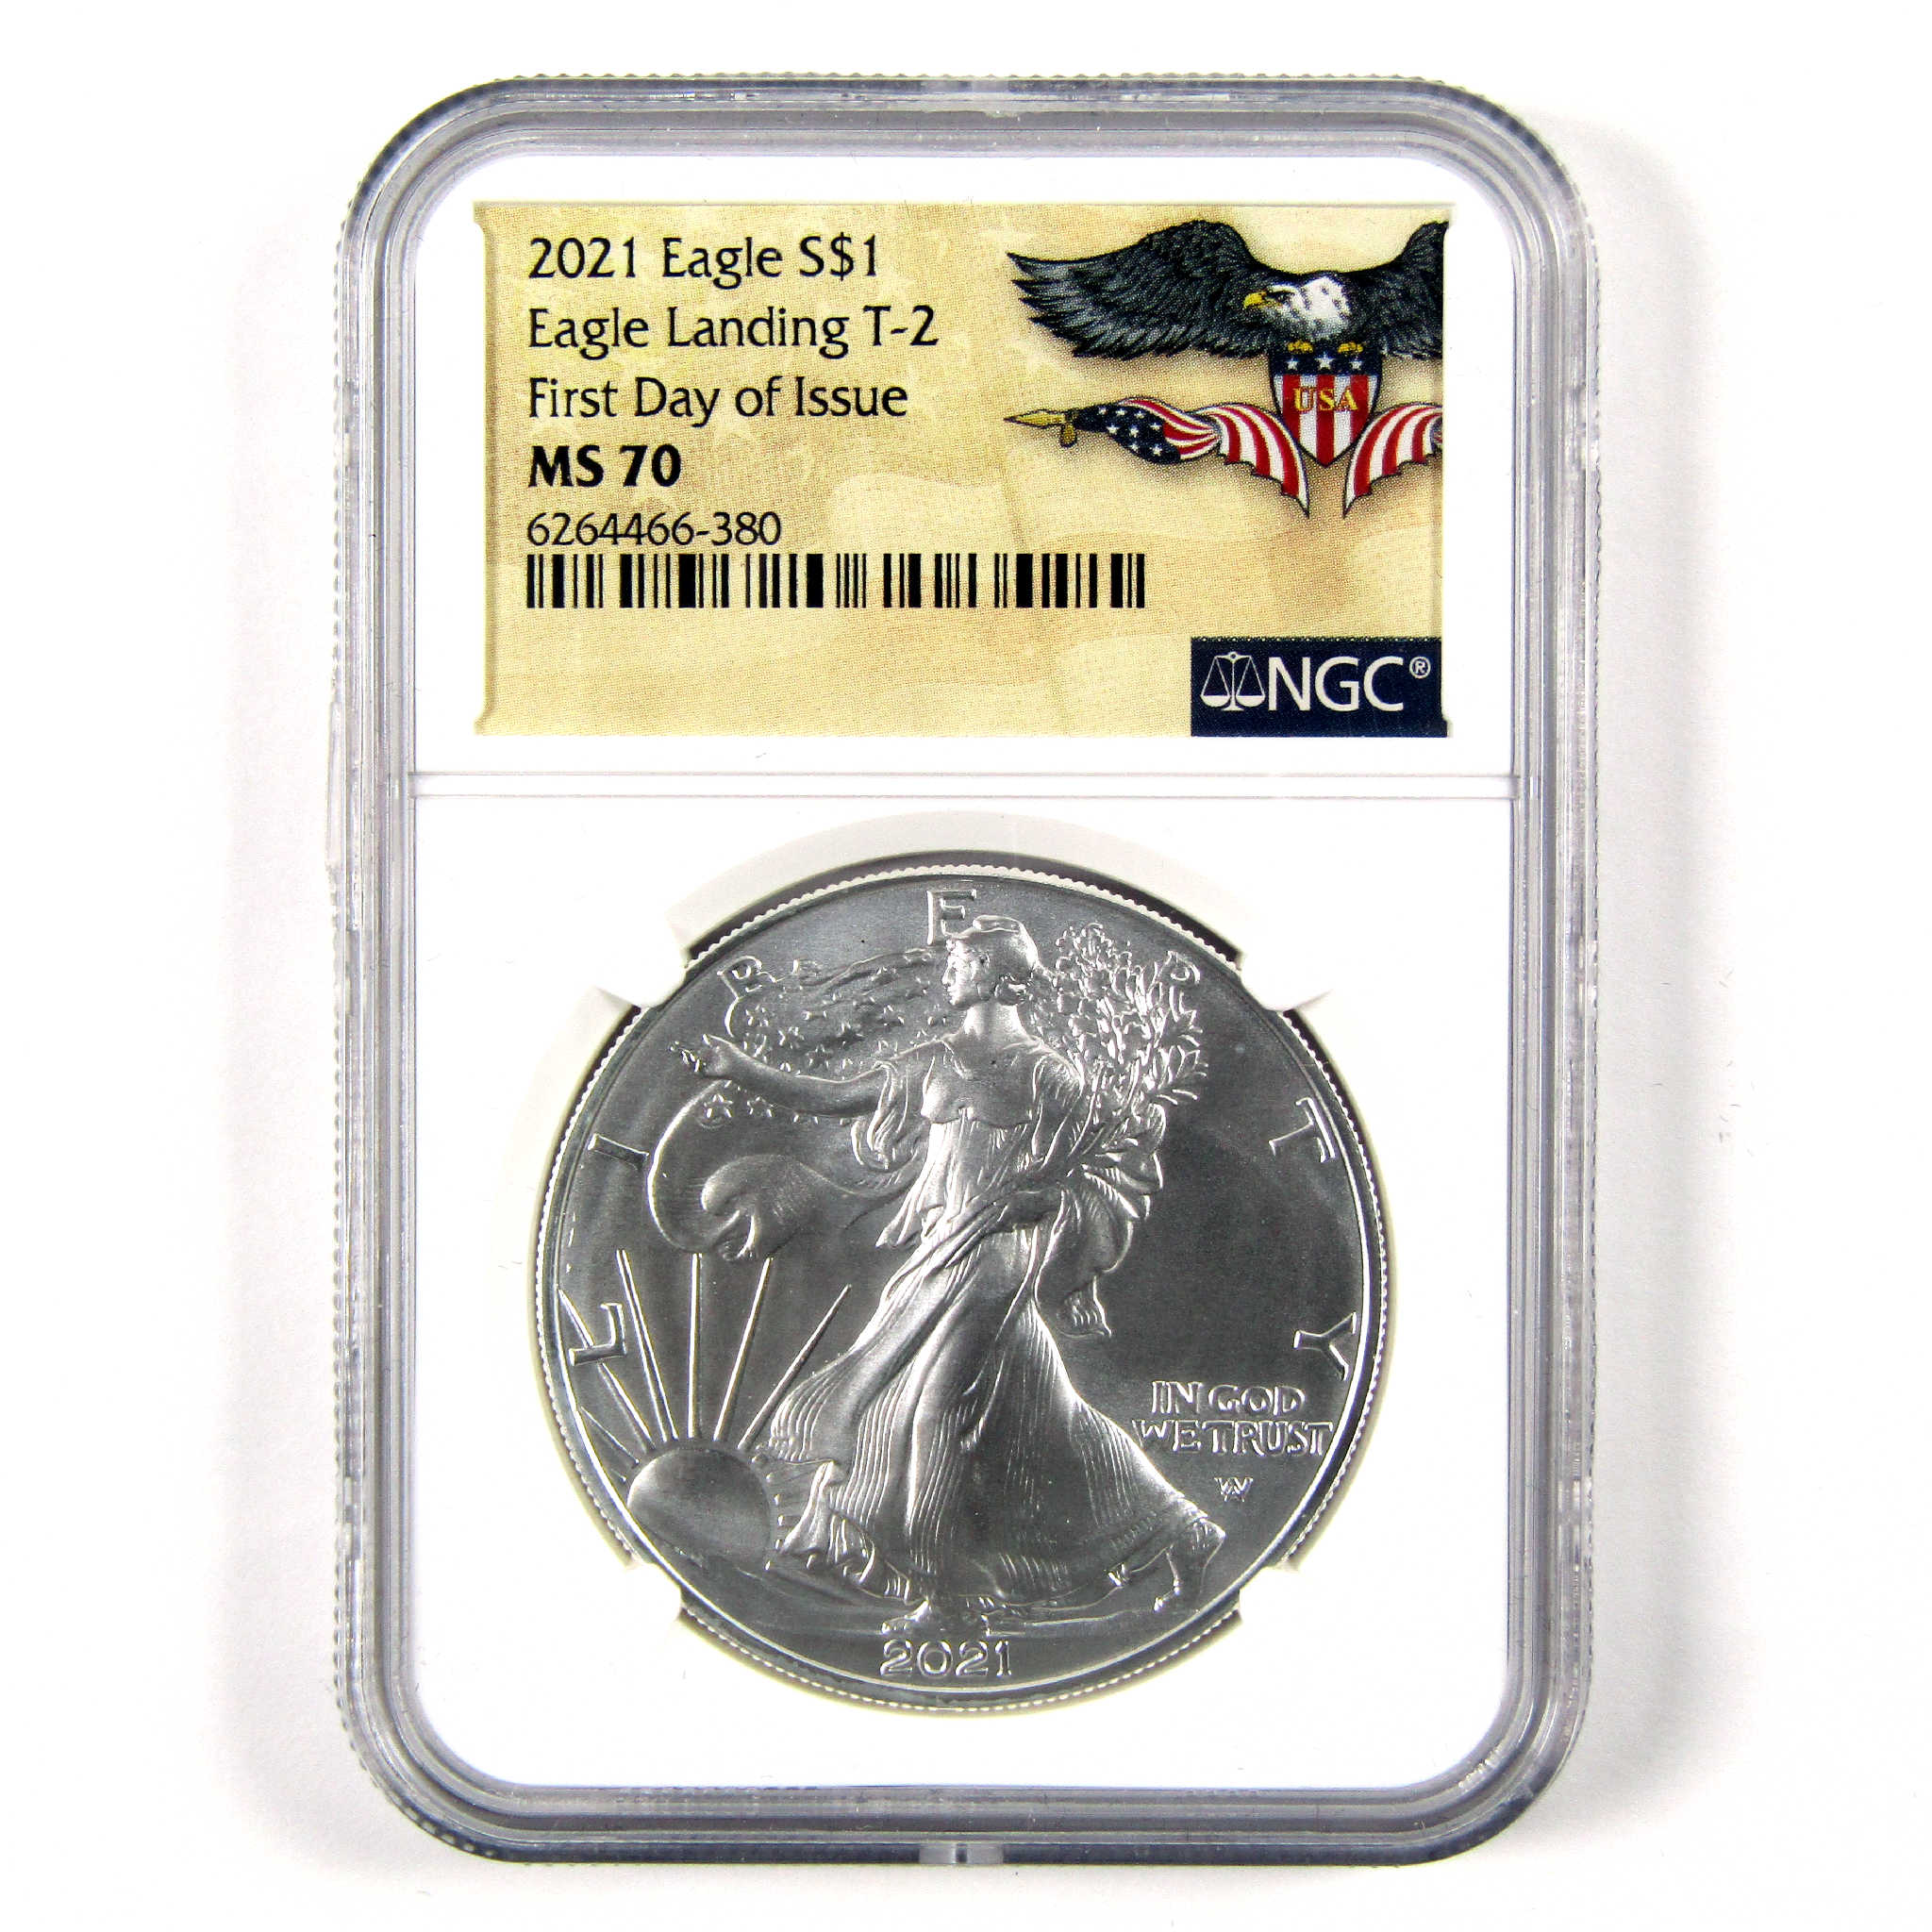 2021 T2 American Silver Eagle MS 70 NGC $1 Unc 1st Day SKU:CPC6436